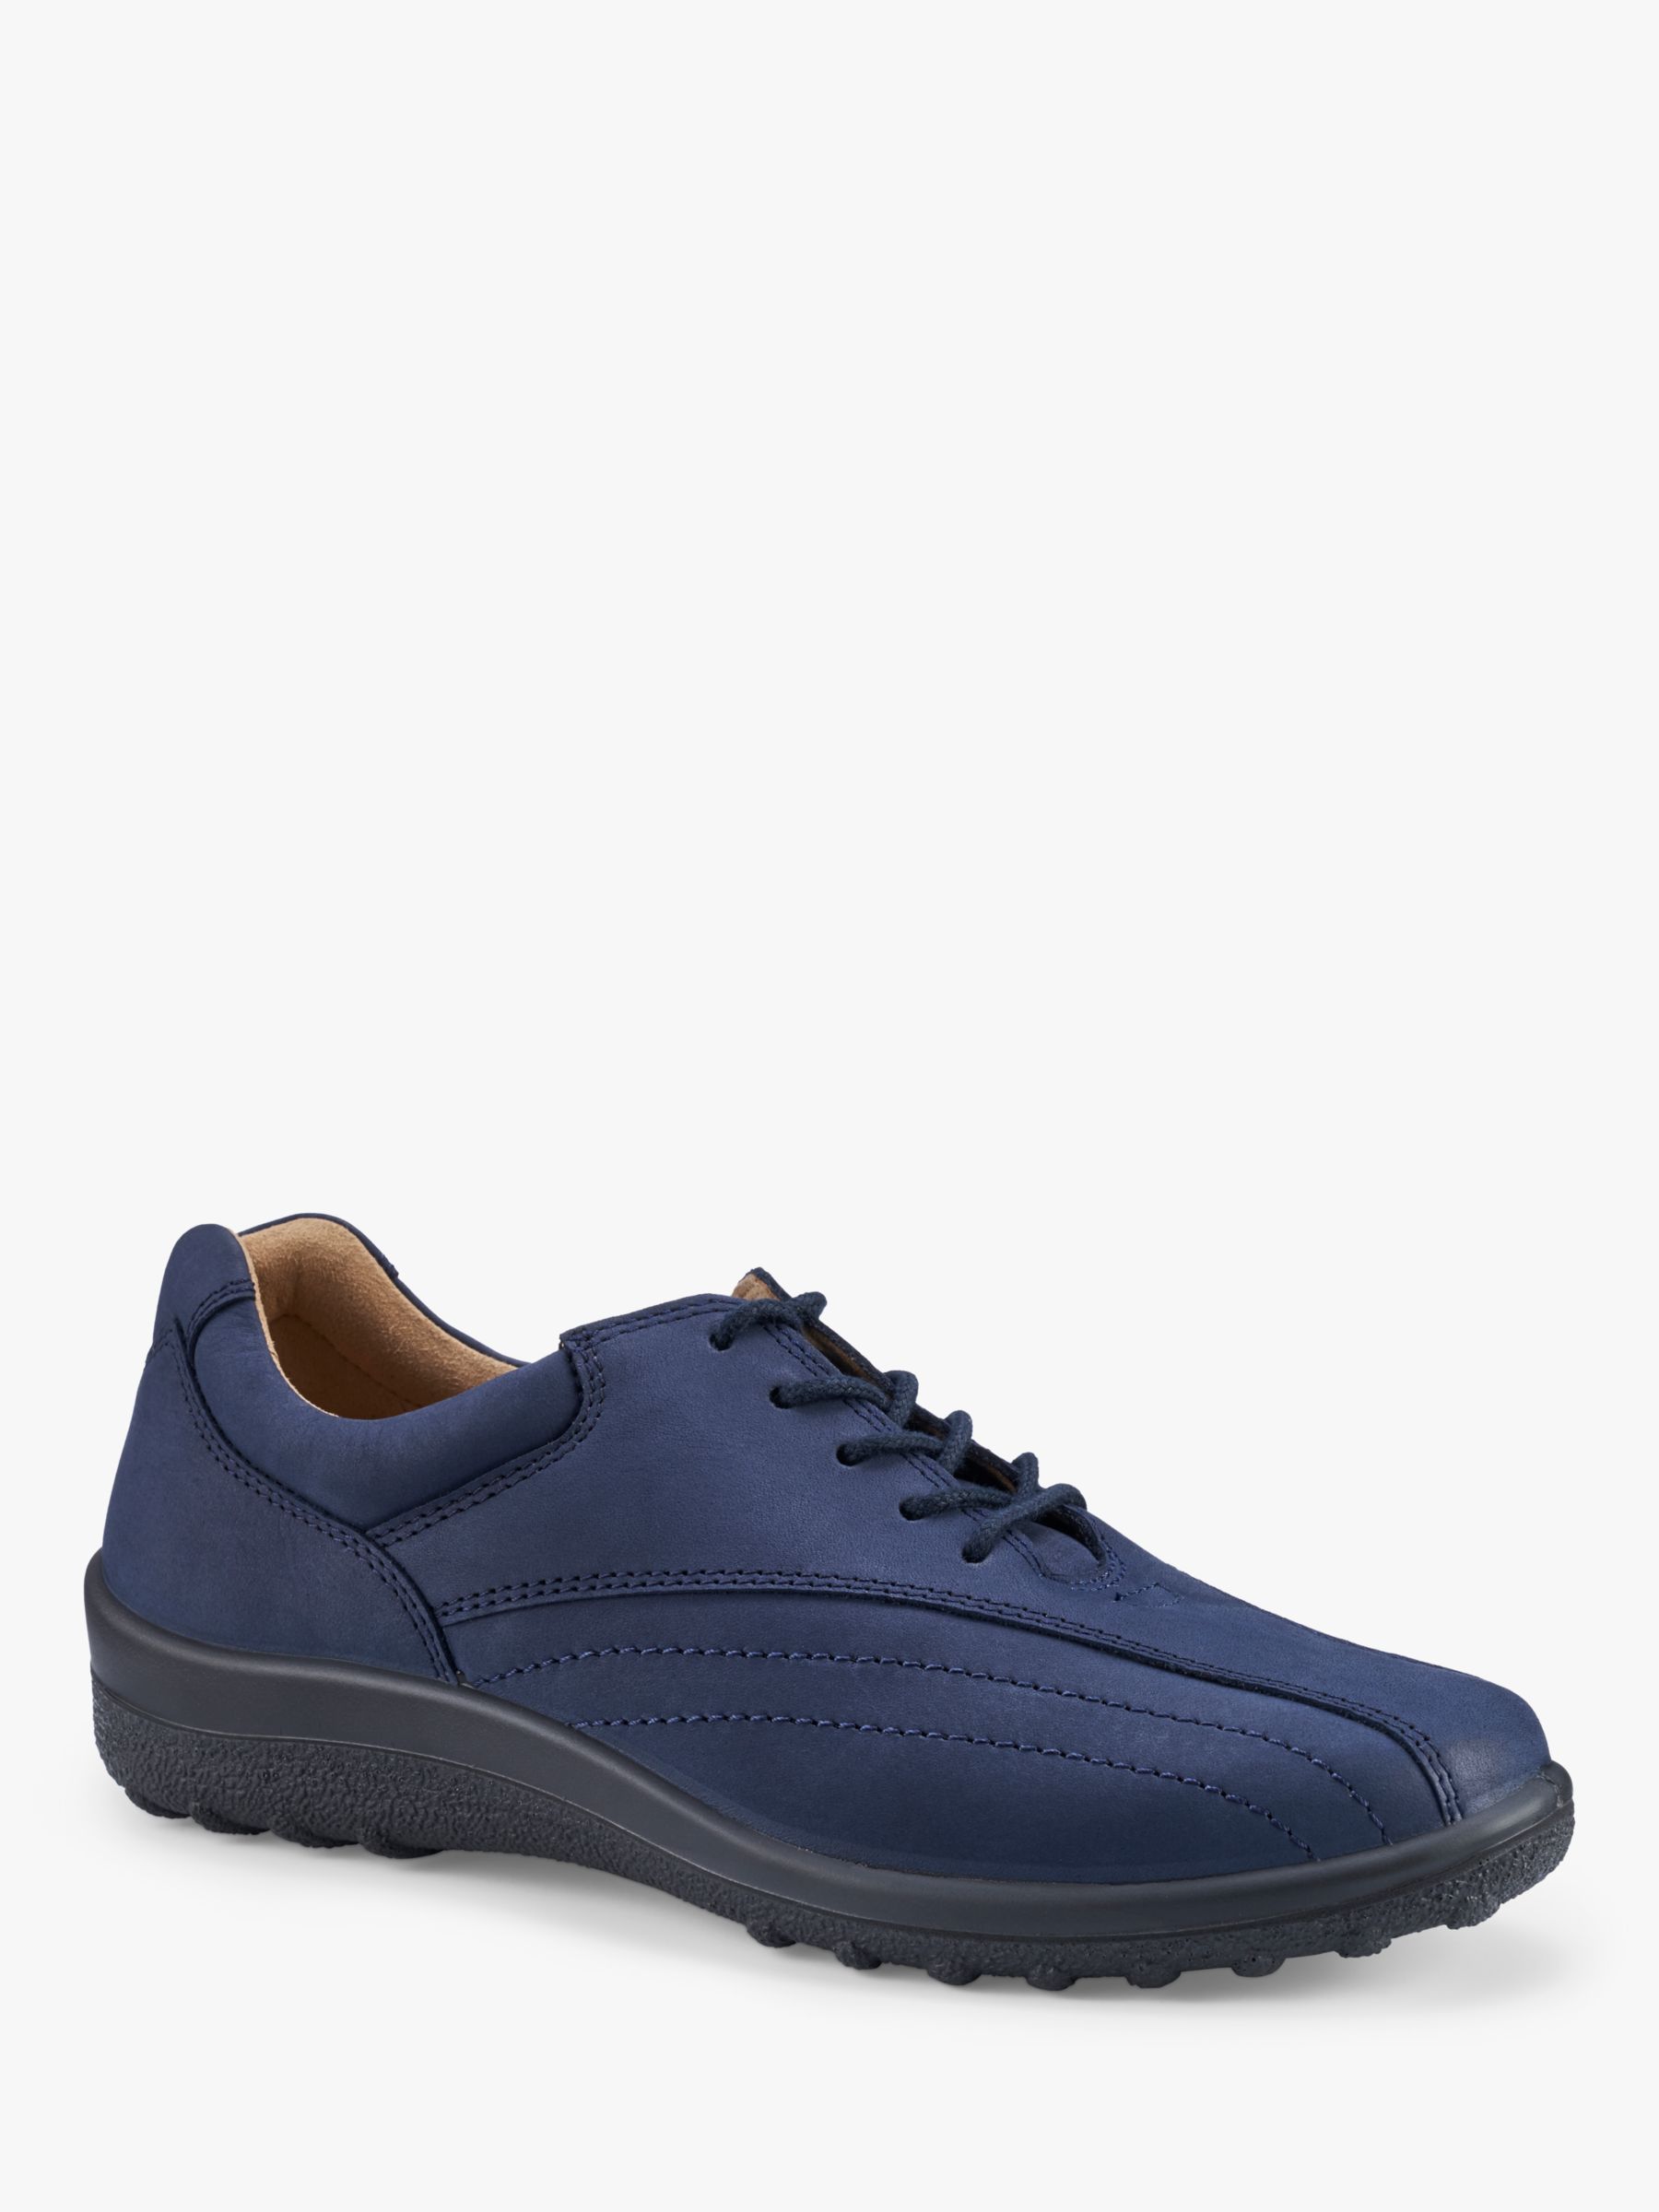 Buy Hotter Tone II Extra Wide Fit Classic Nubuck Bowling Style Shoes, Denim Navy Online at johnlewis.com